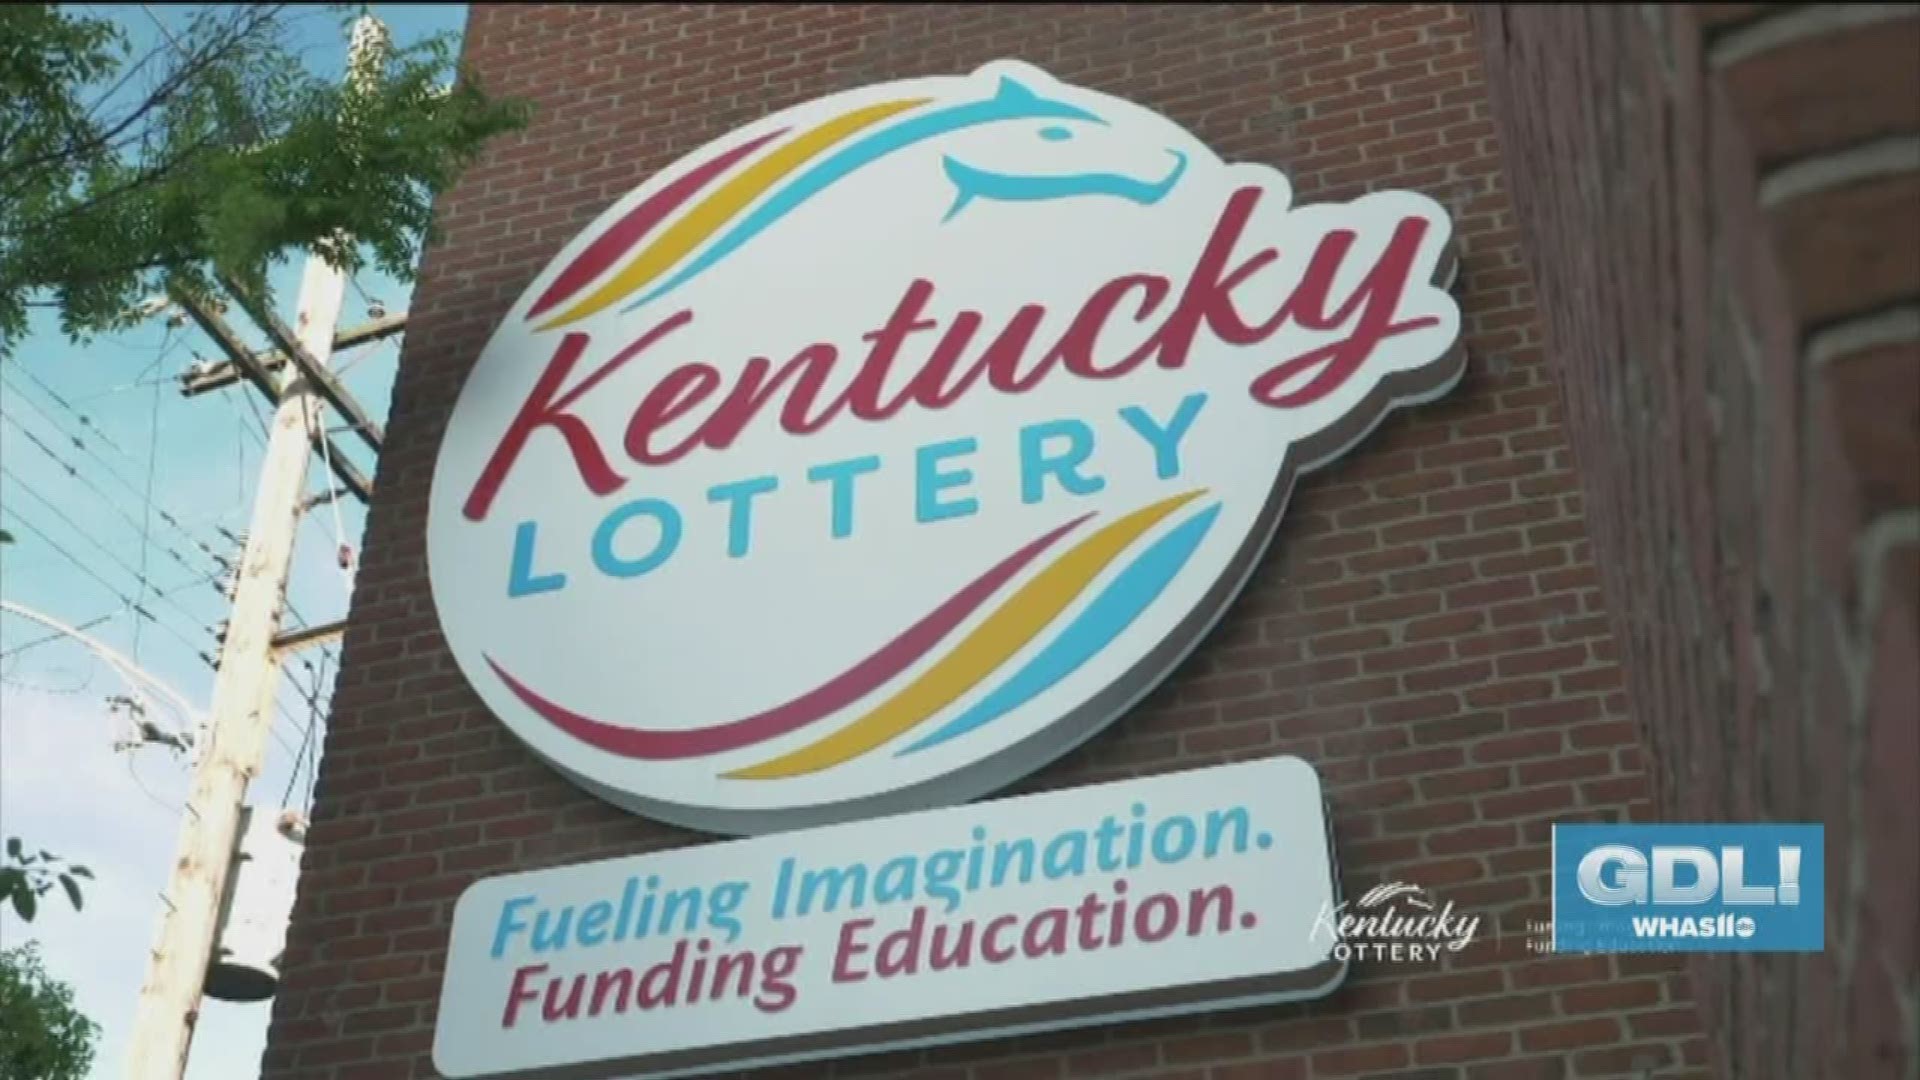 Kentucky Lottery fuels imagination and funds education | whas11.com